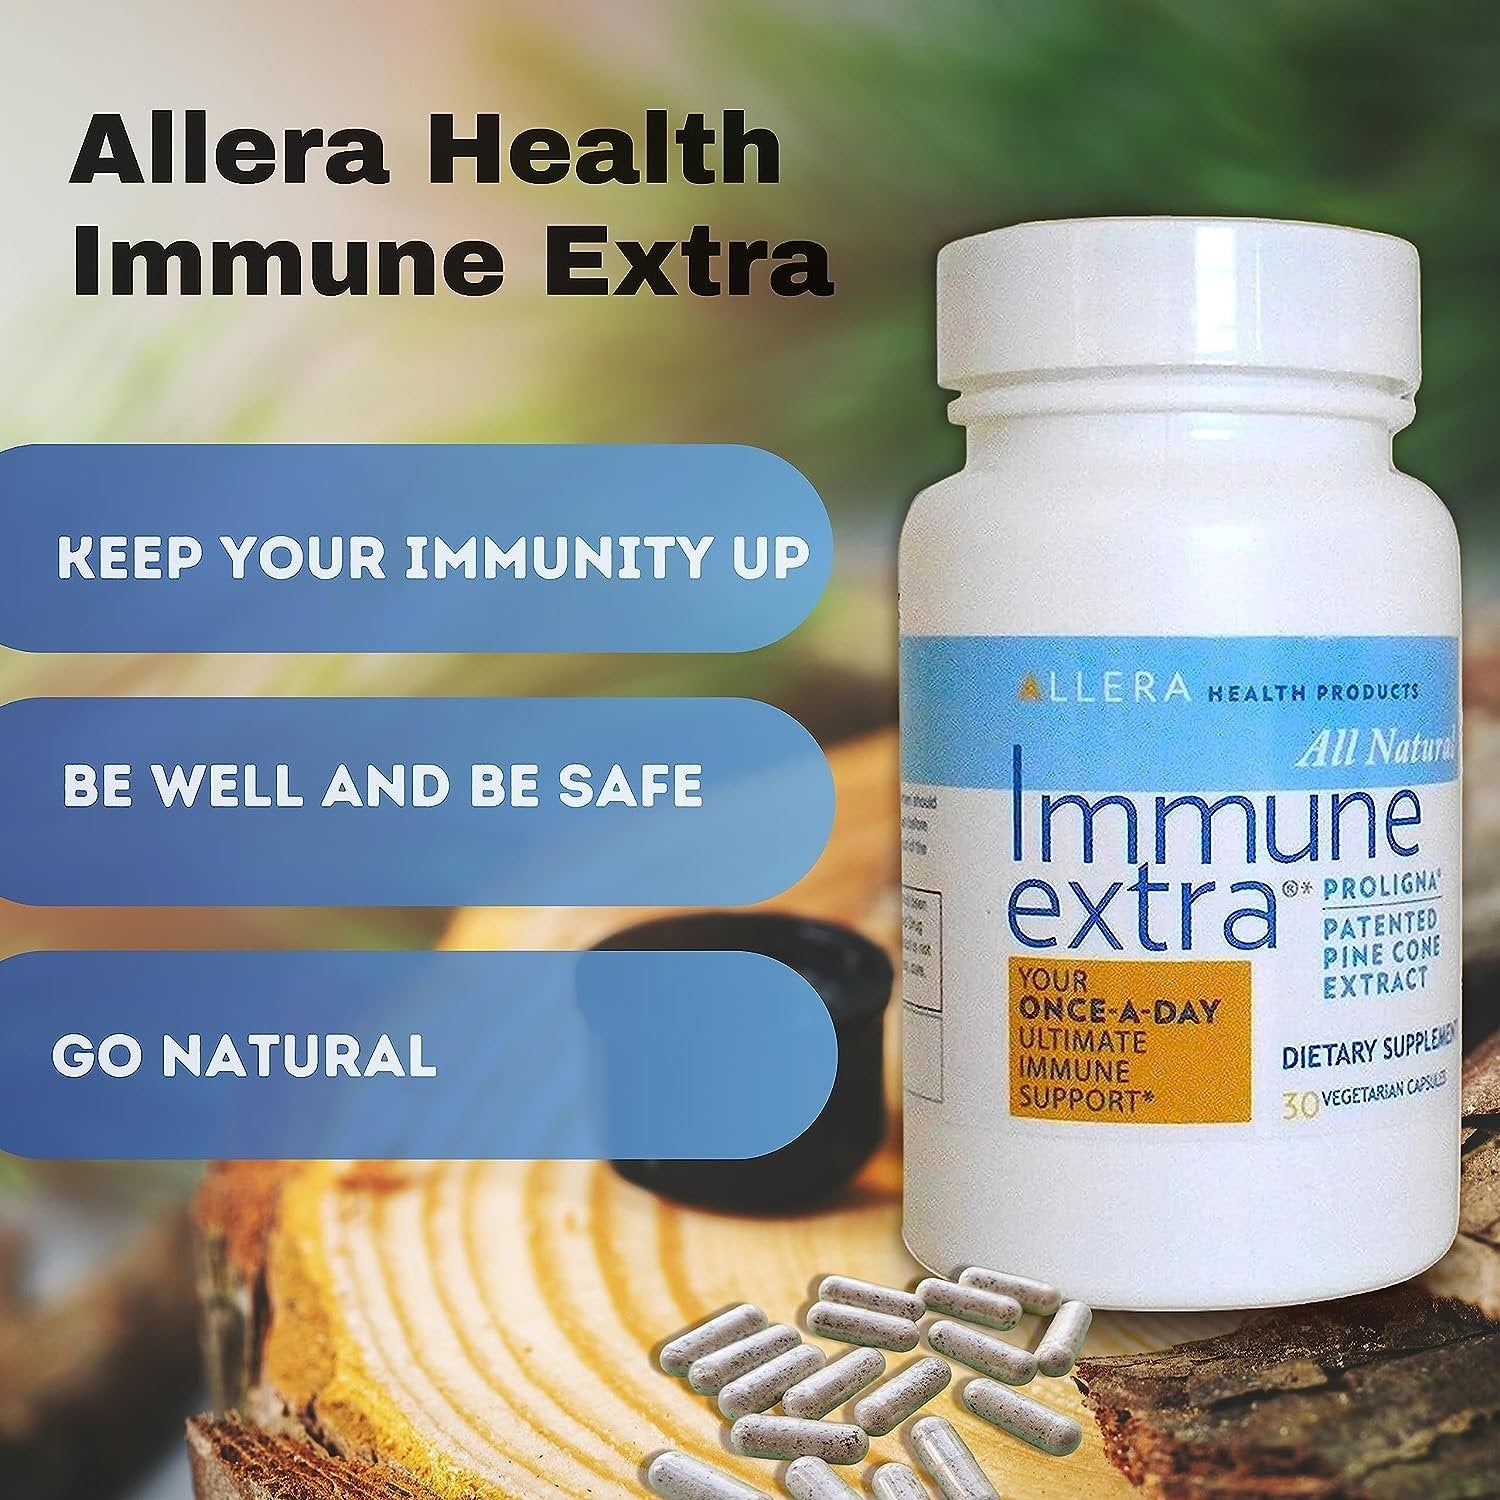 Allera Health Product - Immune Extra - 30 Count - May Support Immune Health - Cold & Flu - Pine Cone Extract - Proligna